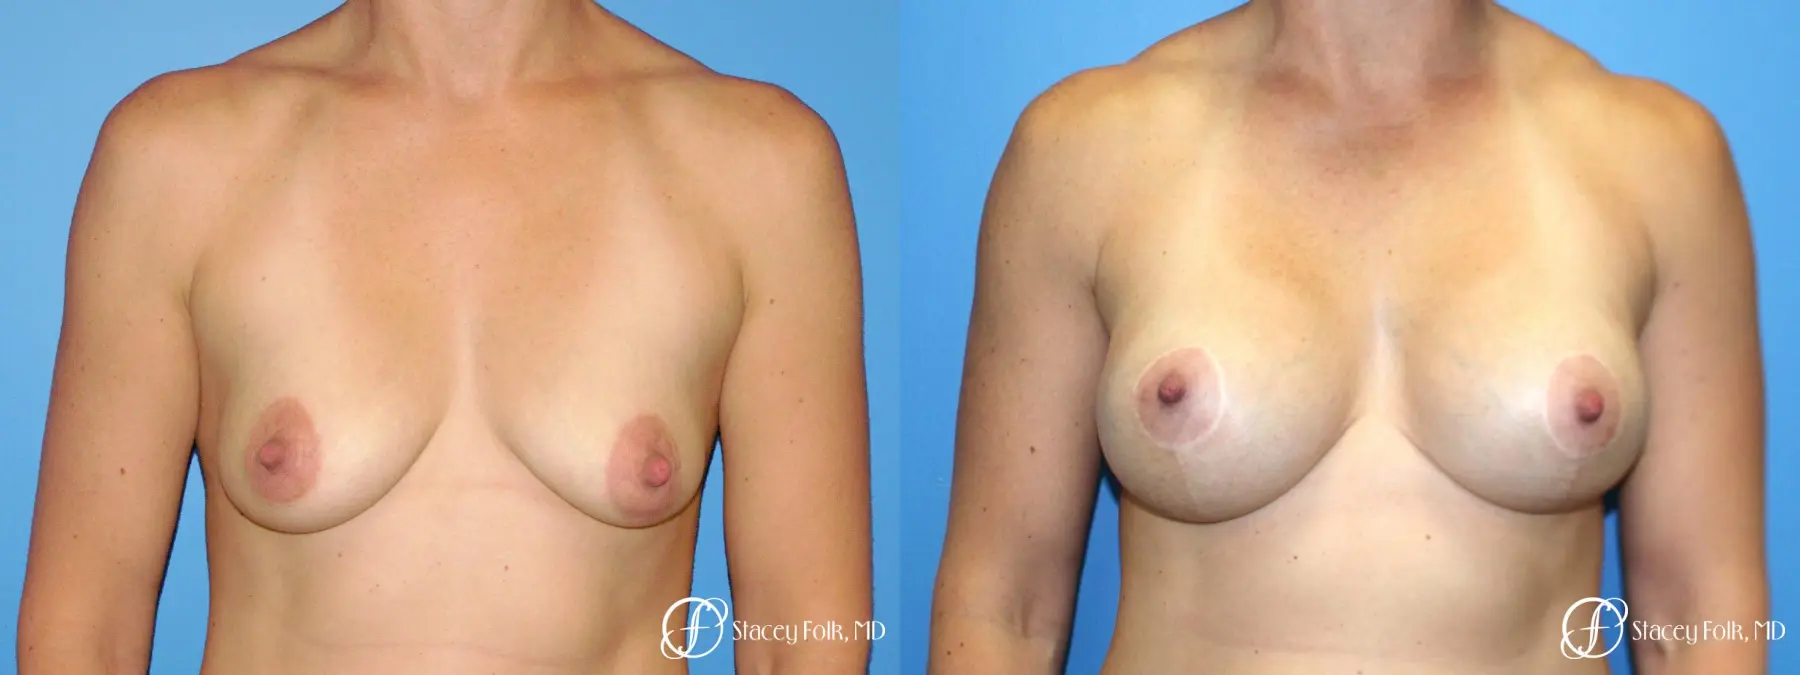 Denver Breast Augmentation with a Breast Lift - Mastopexy 8361 - Before and After 1